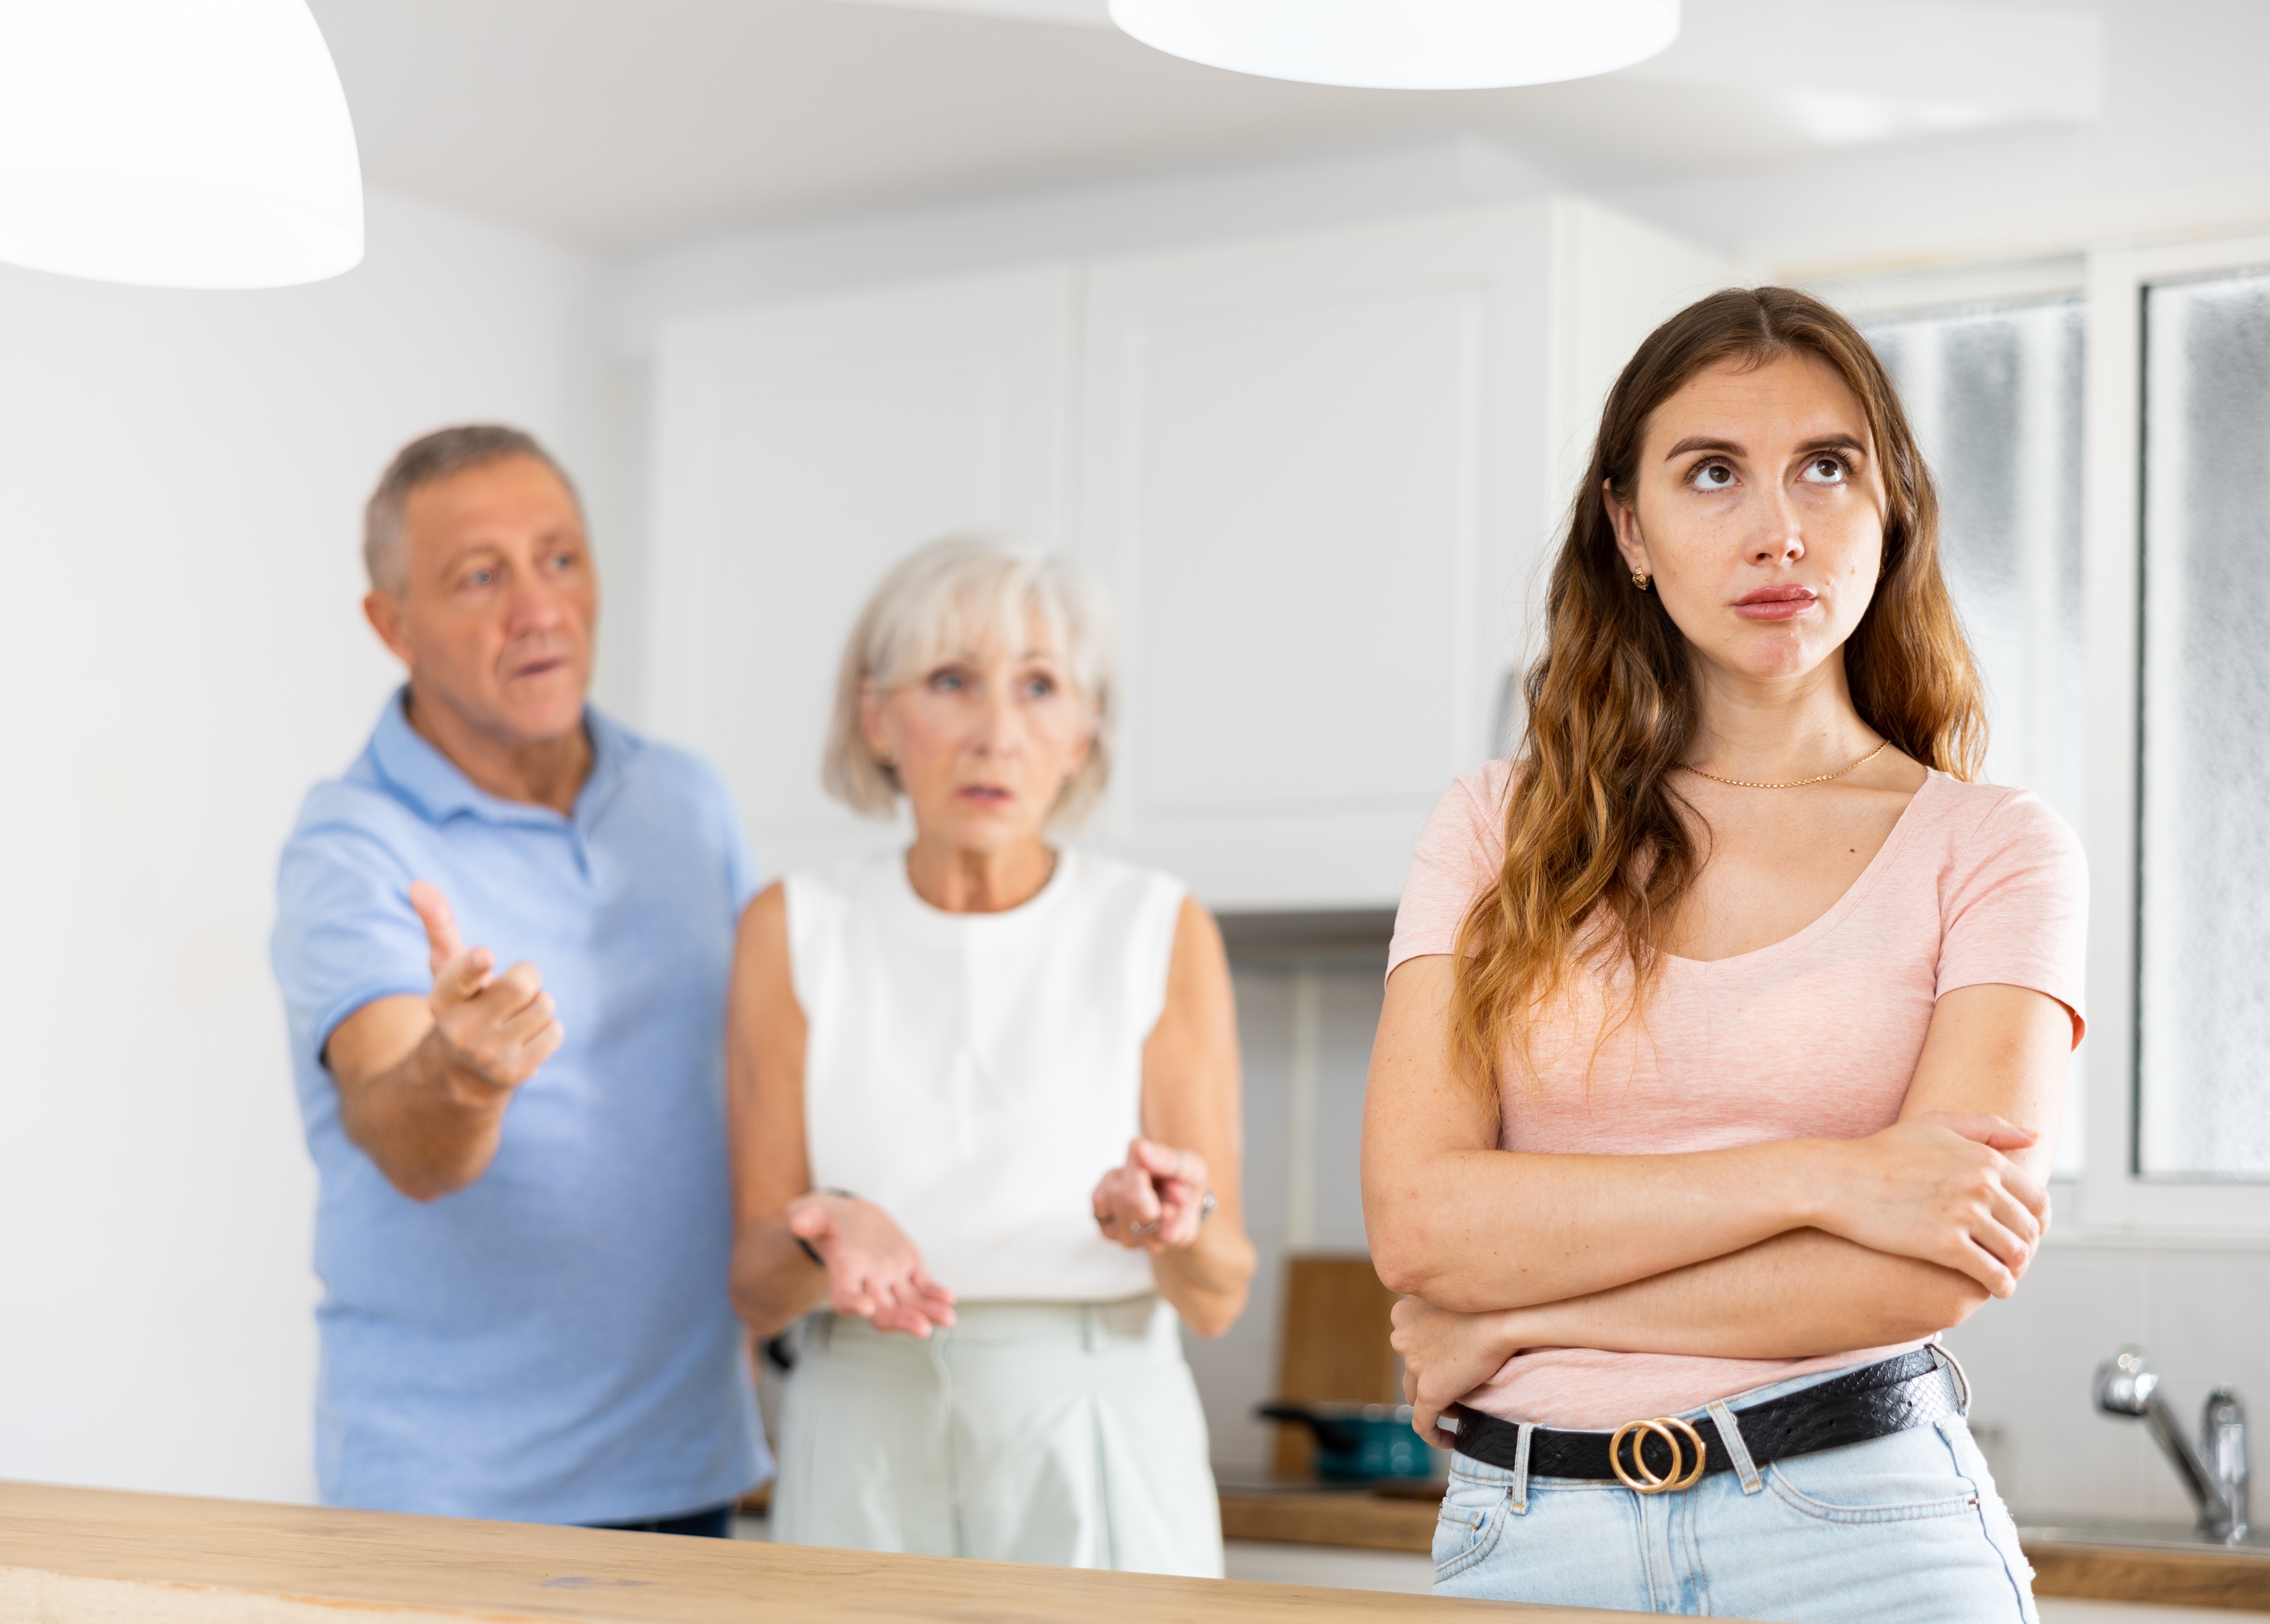 Parents argue with their adult daughter | Source: Shutterstock